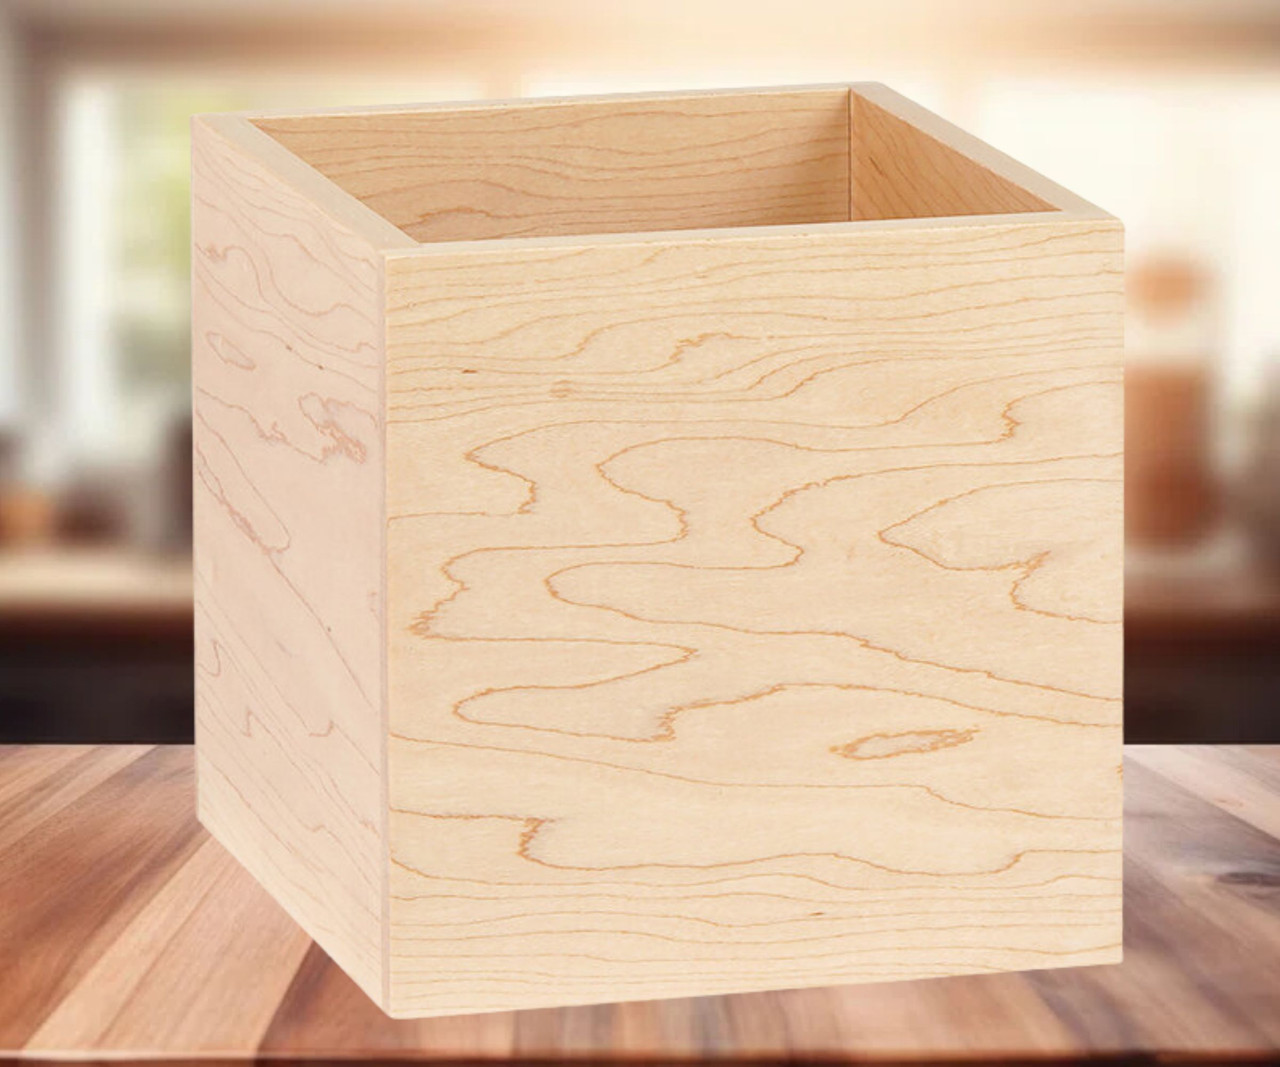 Cal-Mil Blonde 6" x 6" x 6" Maple Wood Merchandiser Box | Minimalistic Display for Snacks and Produce